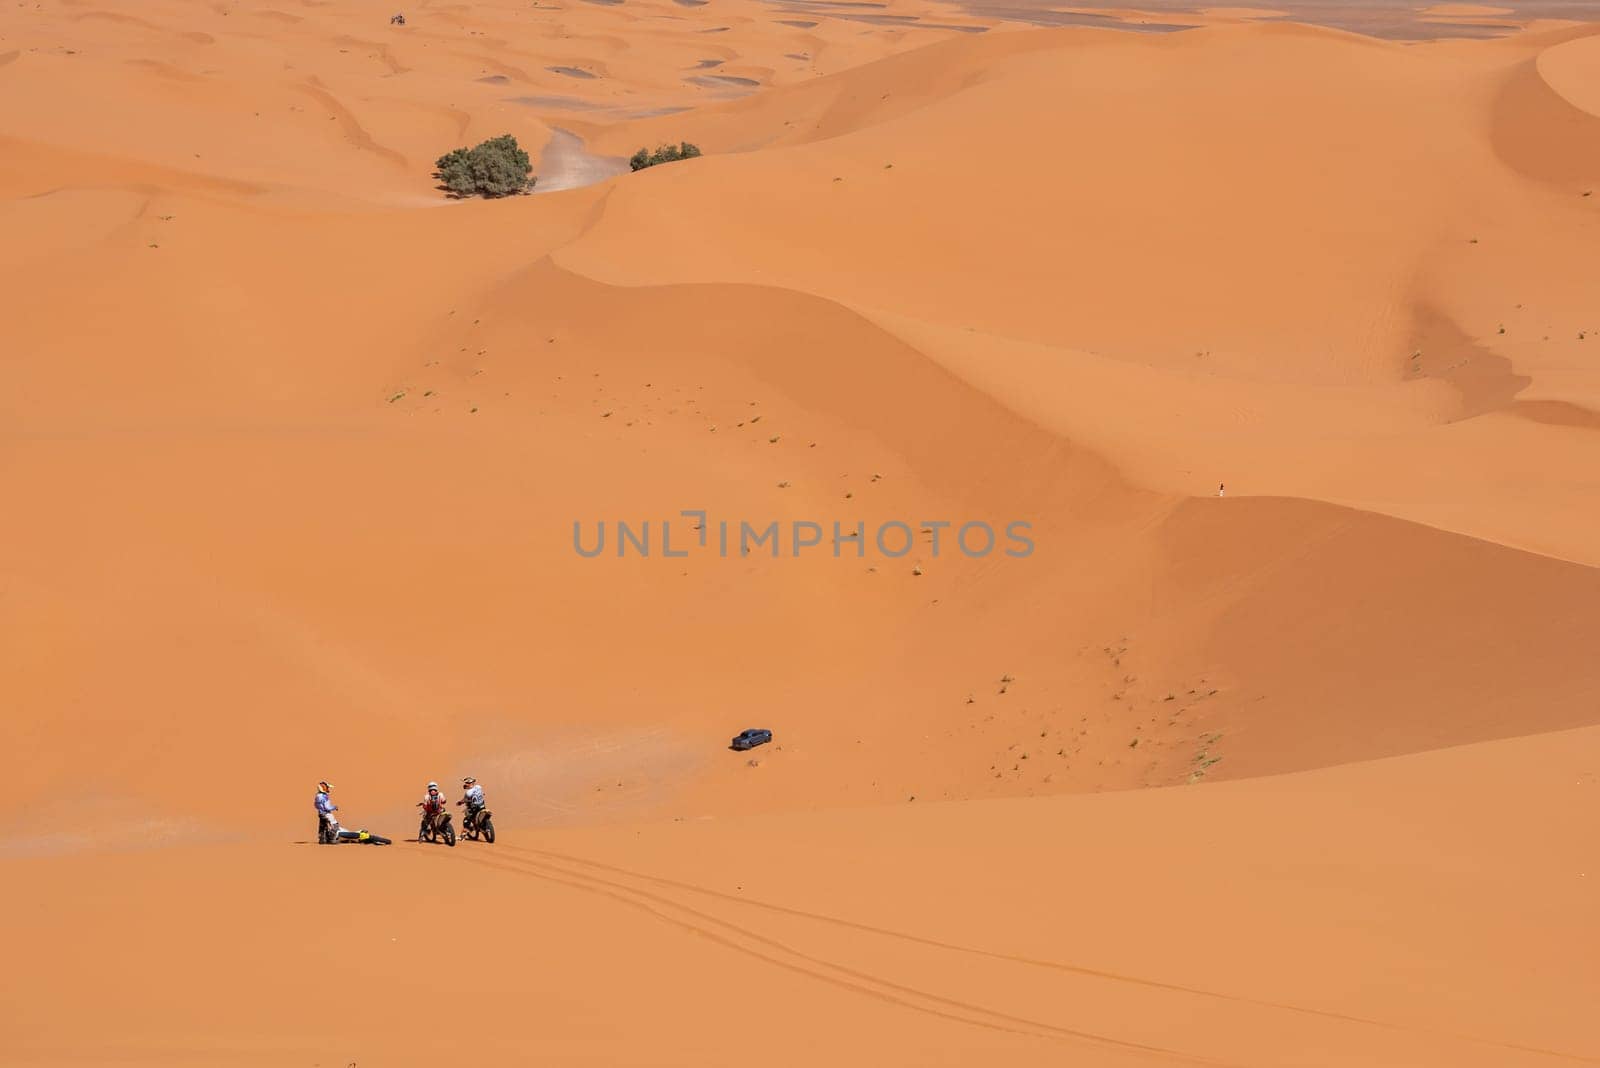 Motorbikers driving off-road in the Erg Chebbi desert near Merzouga by imagoDens